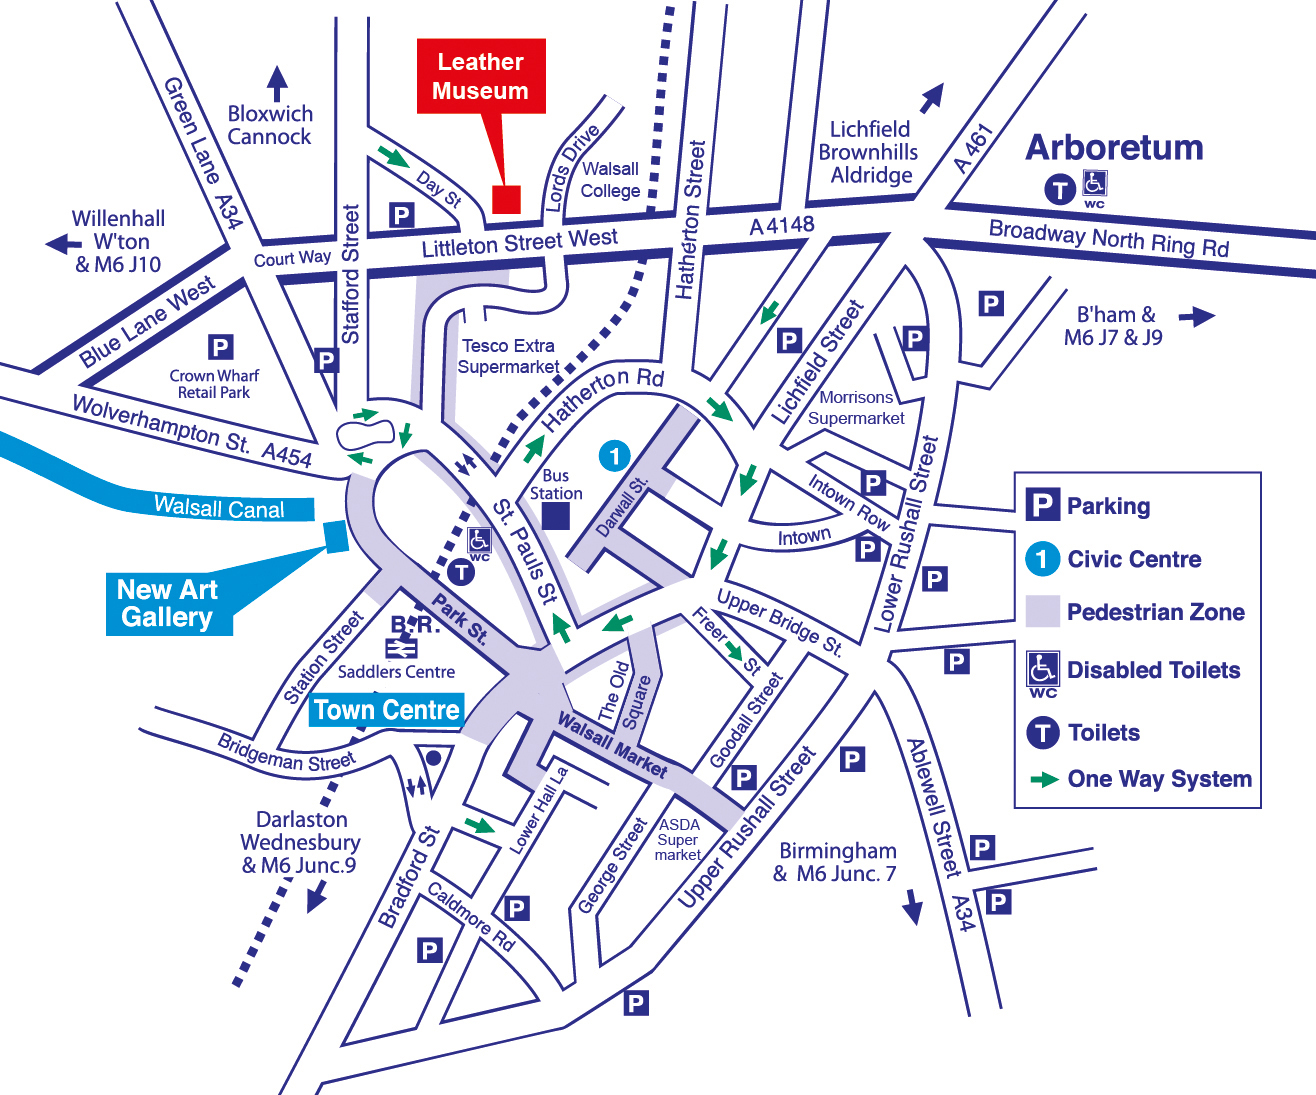 Map of Walsall town centre showing the location of the Leather Museum on Littleton Street West